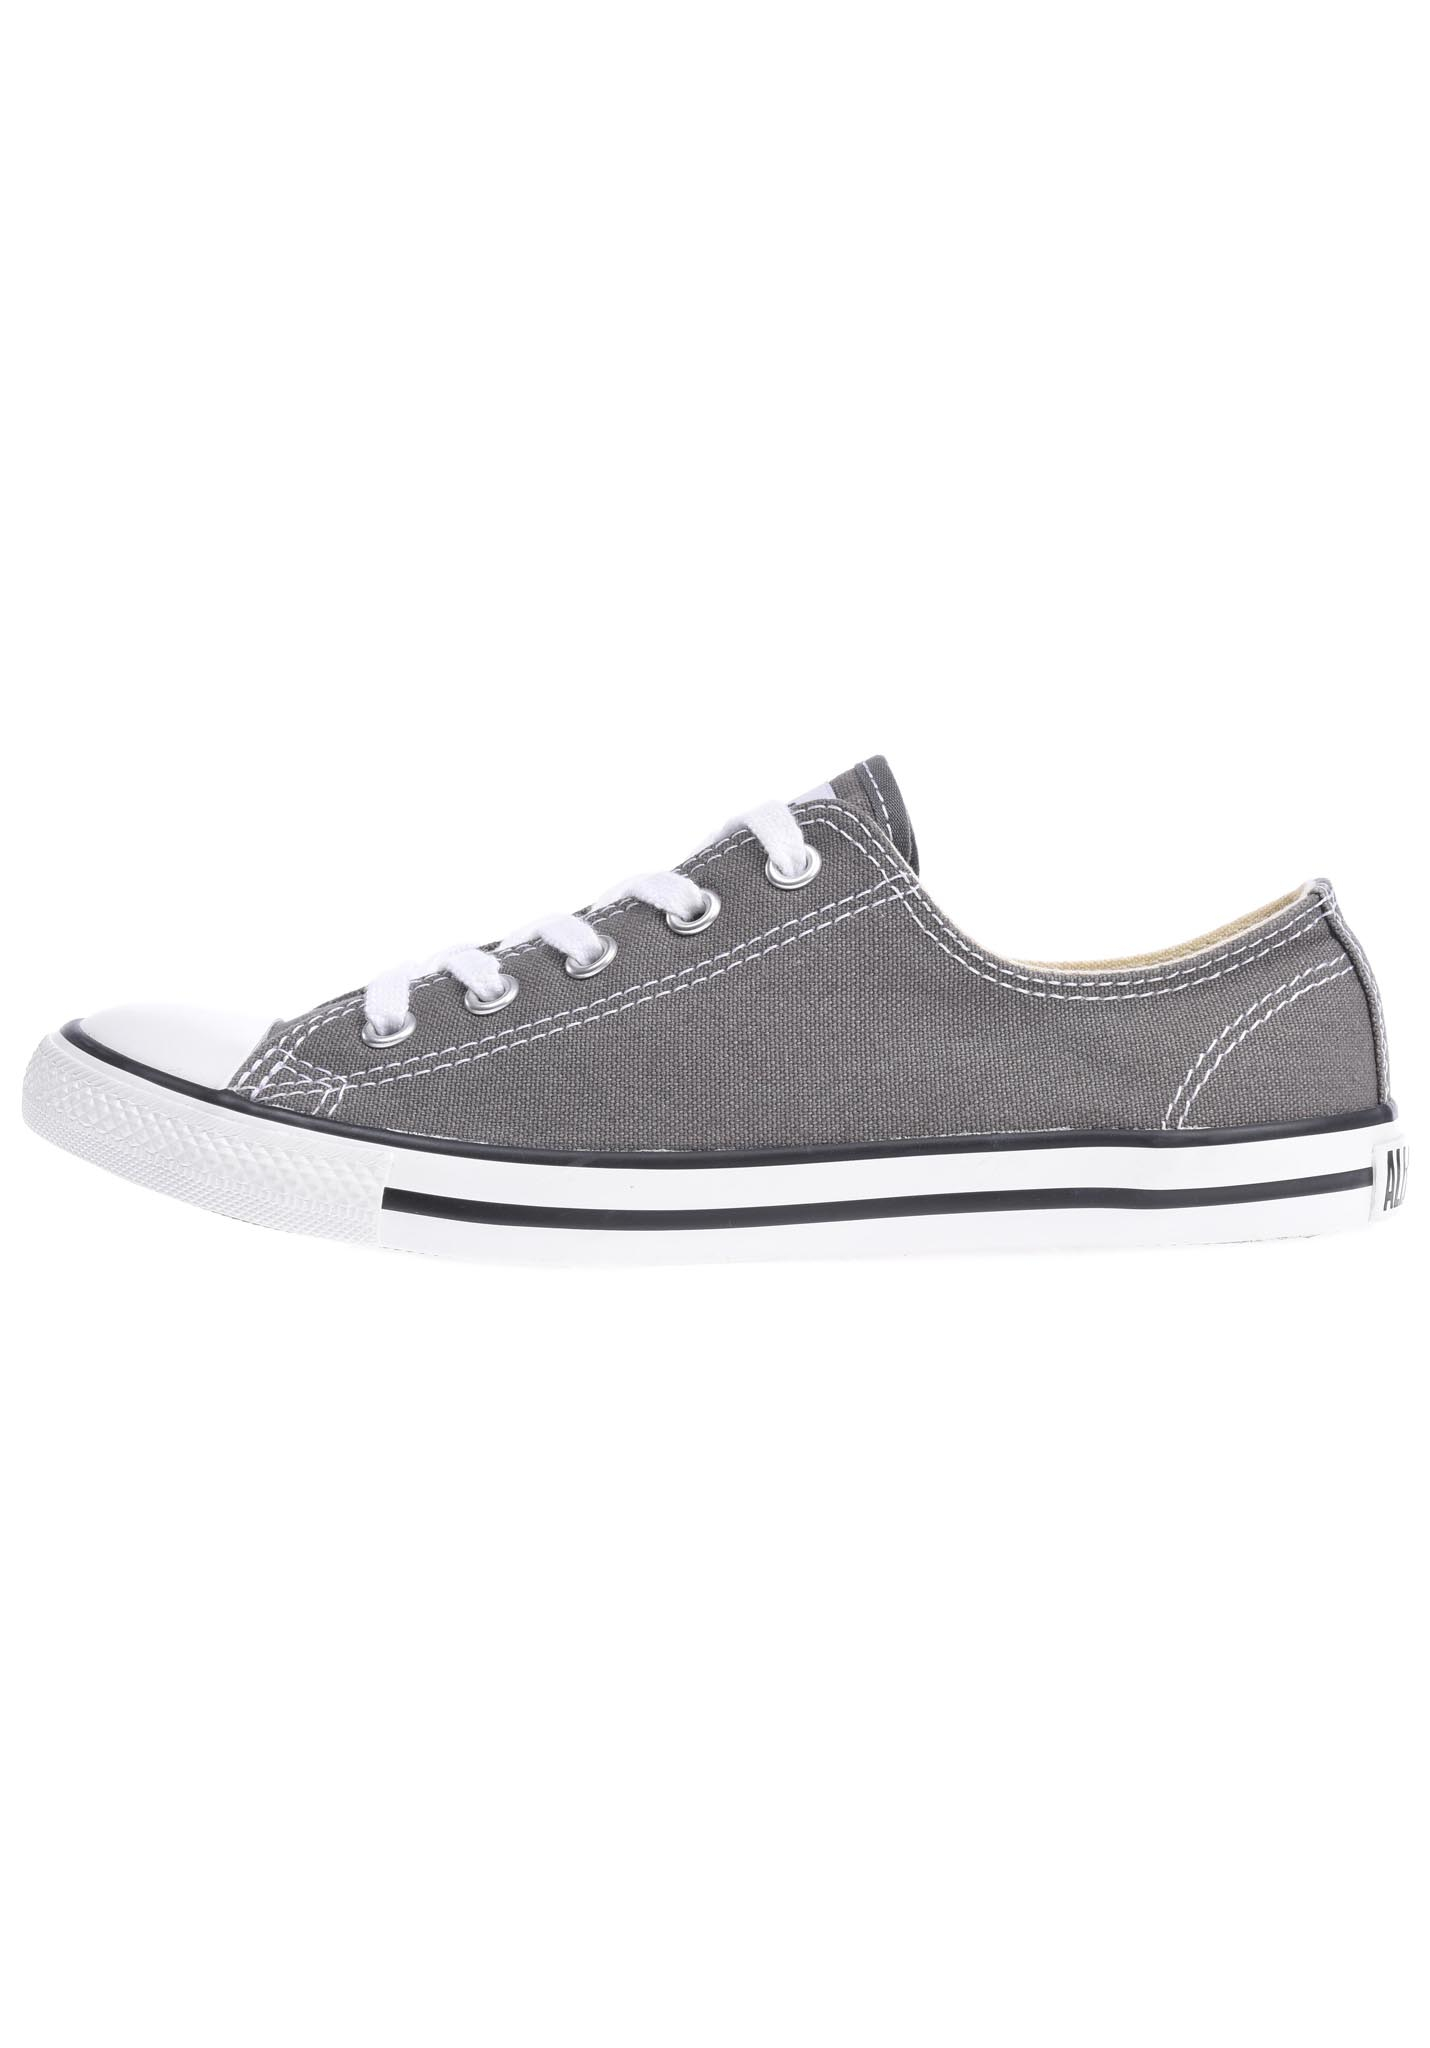 Converse Chuck Taylor All Star Dainty Ox Sneaker Low charcoal 40